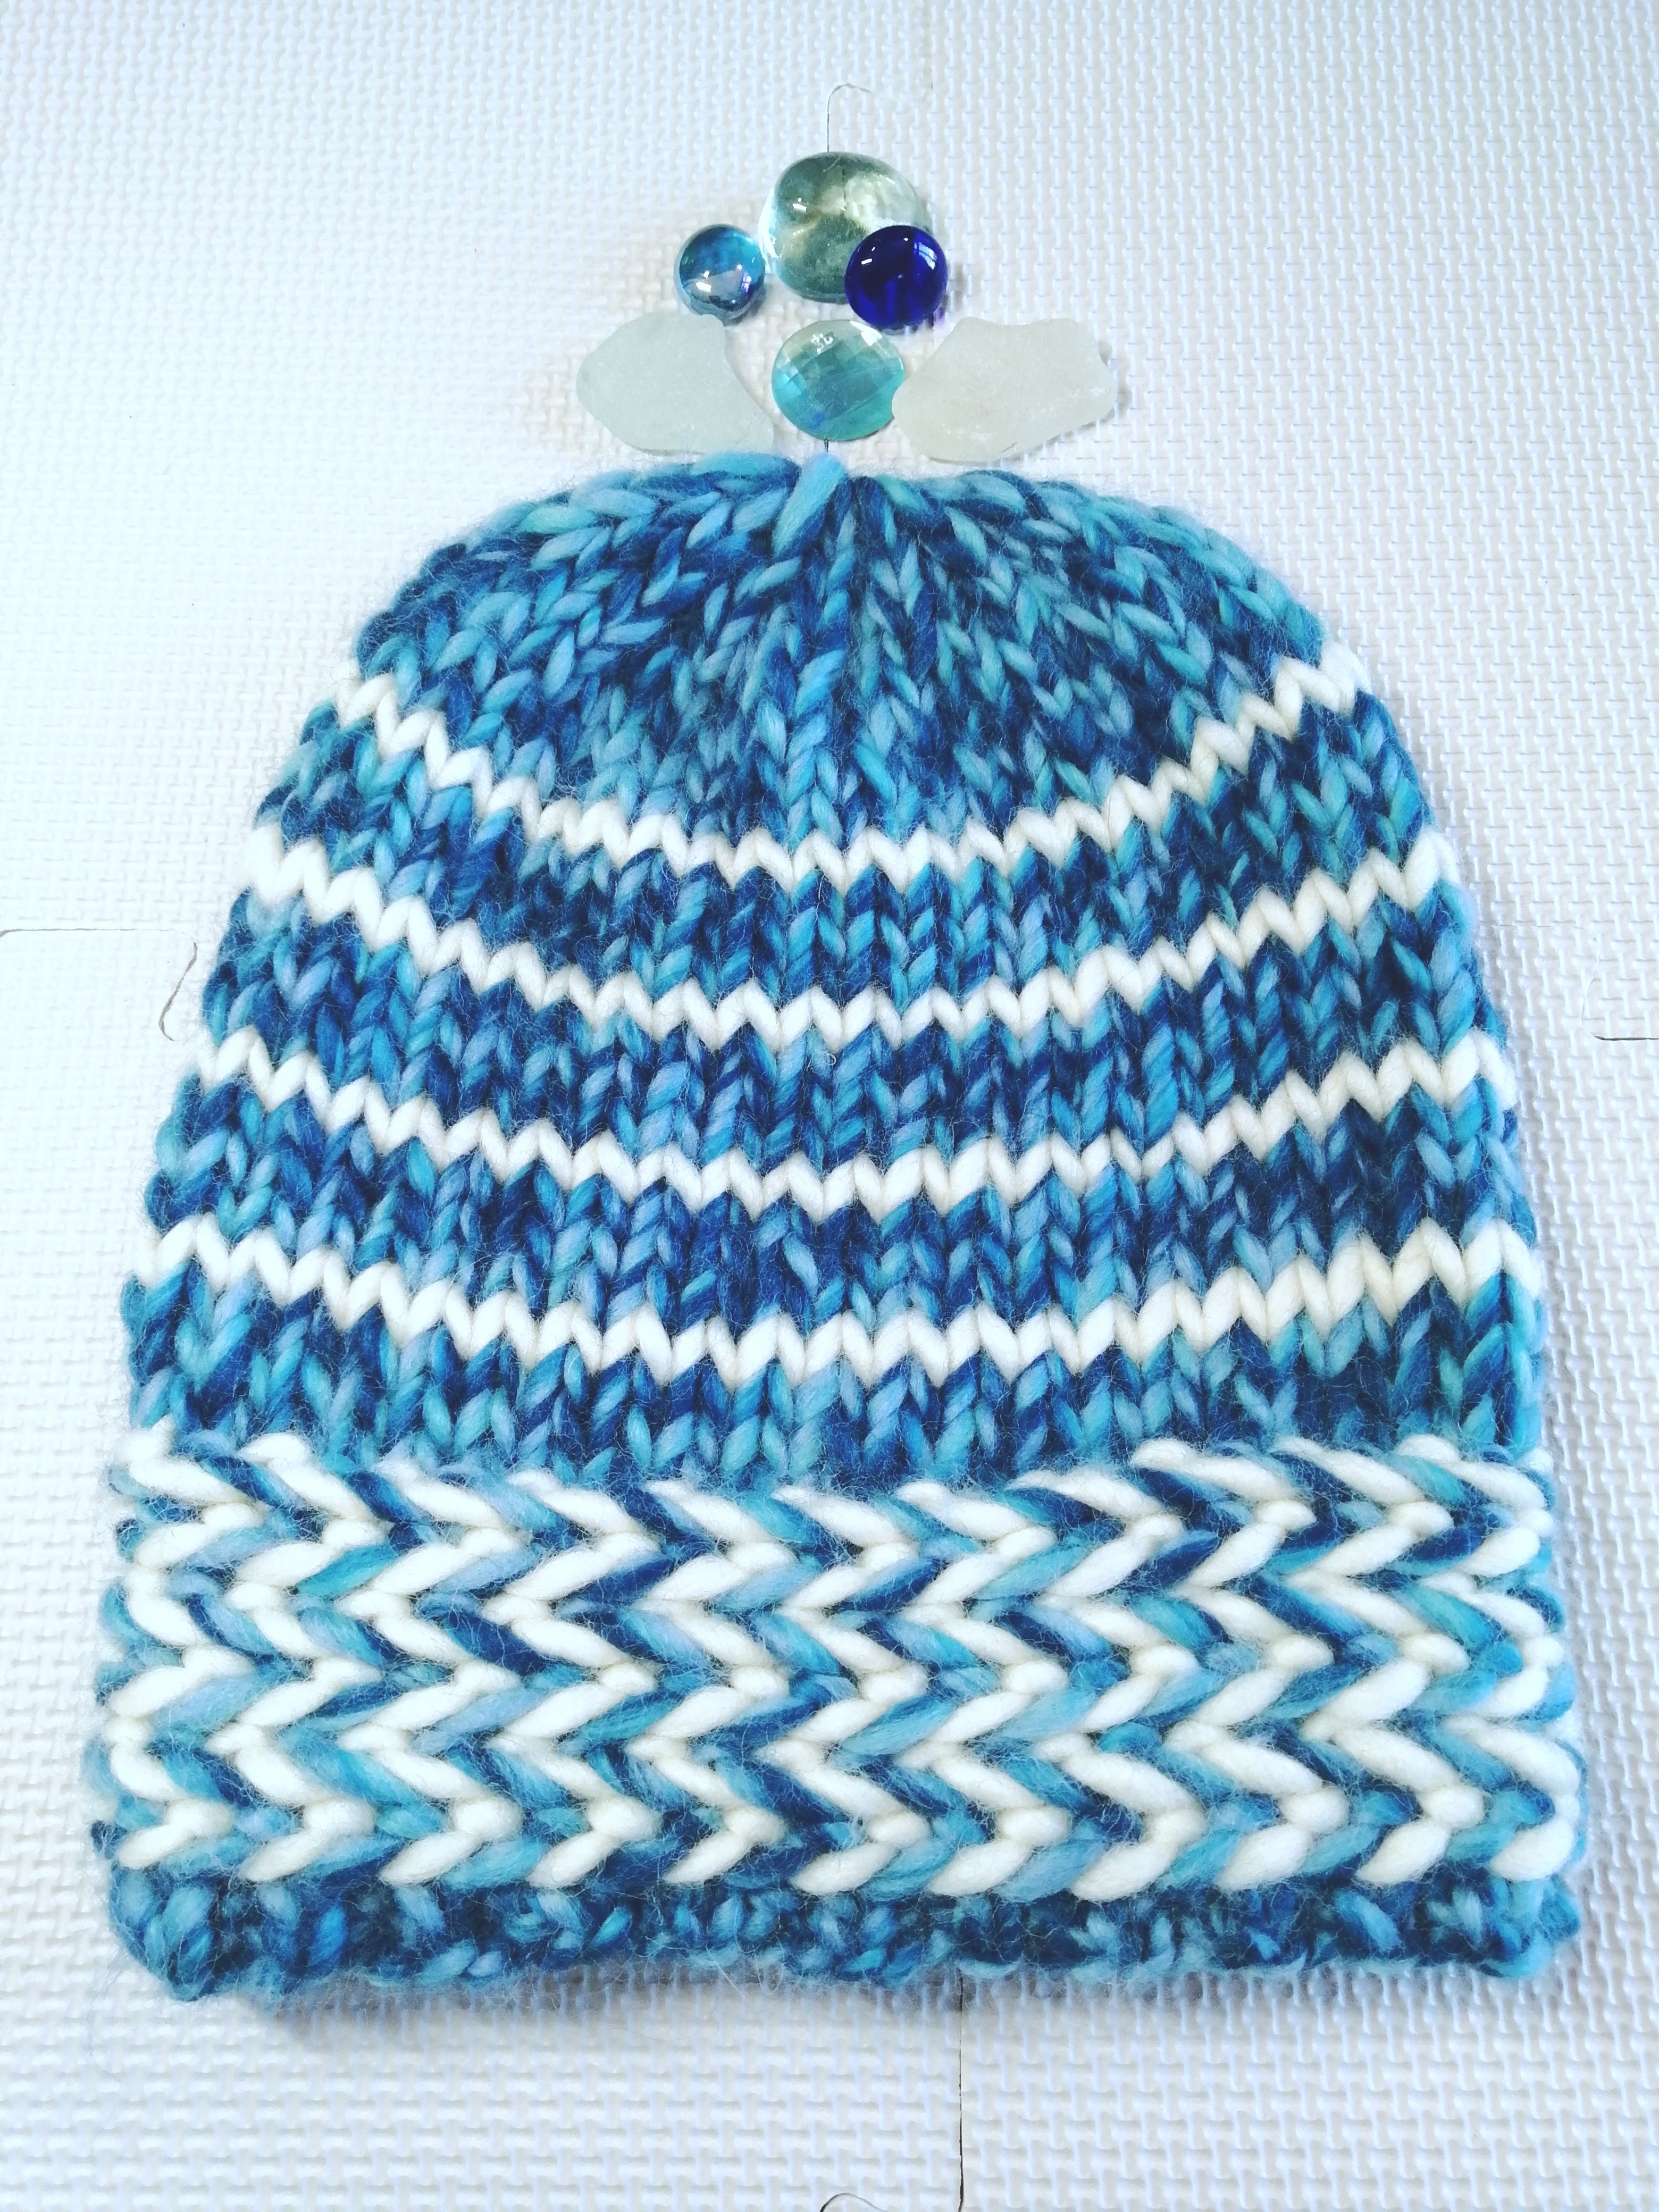 Blue merino wool beanie / hat hand knit in super chunky yarn with faux fur white pom (optional). Adult sized